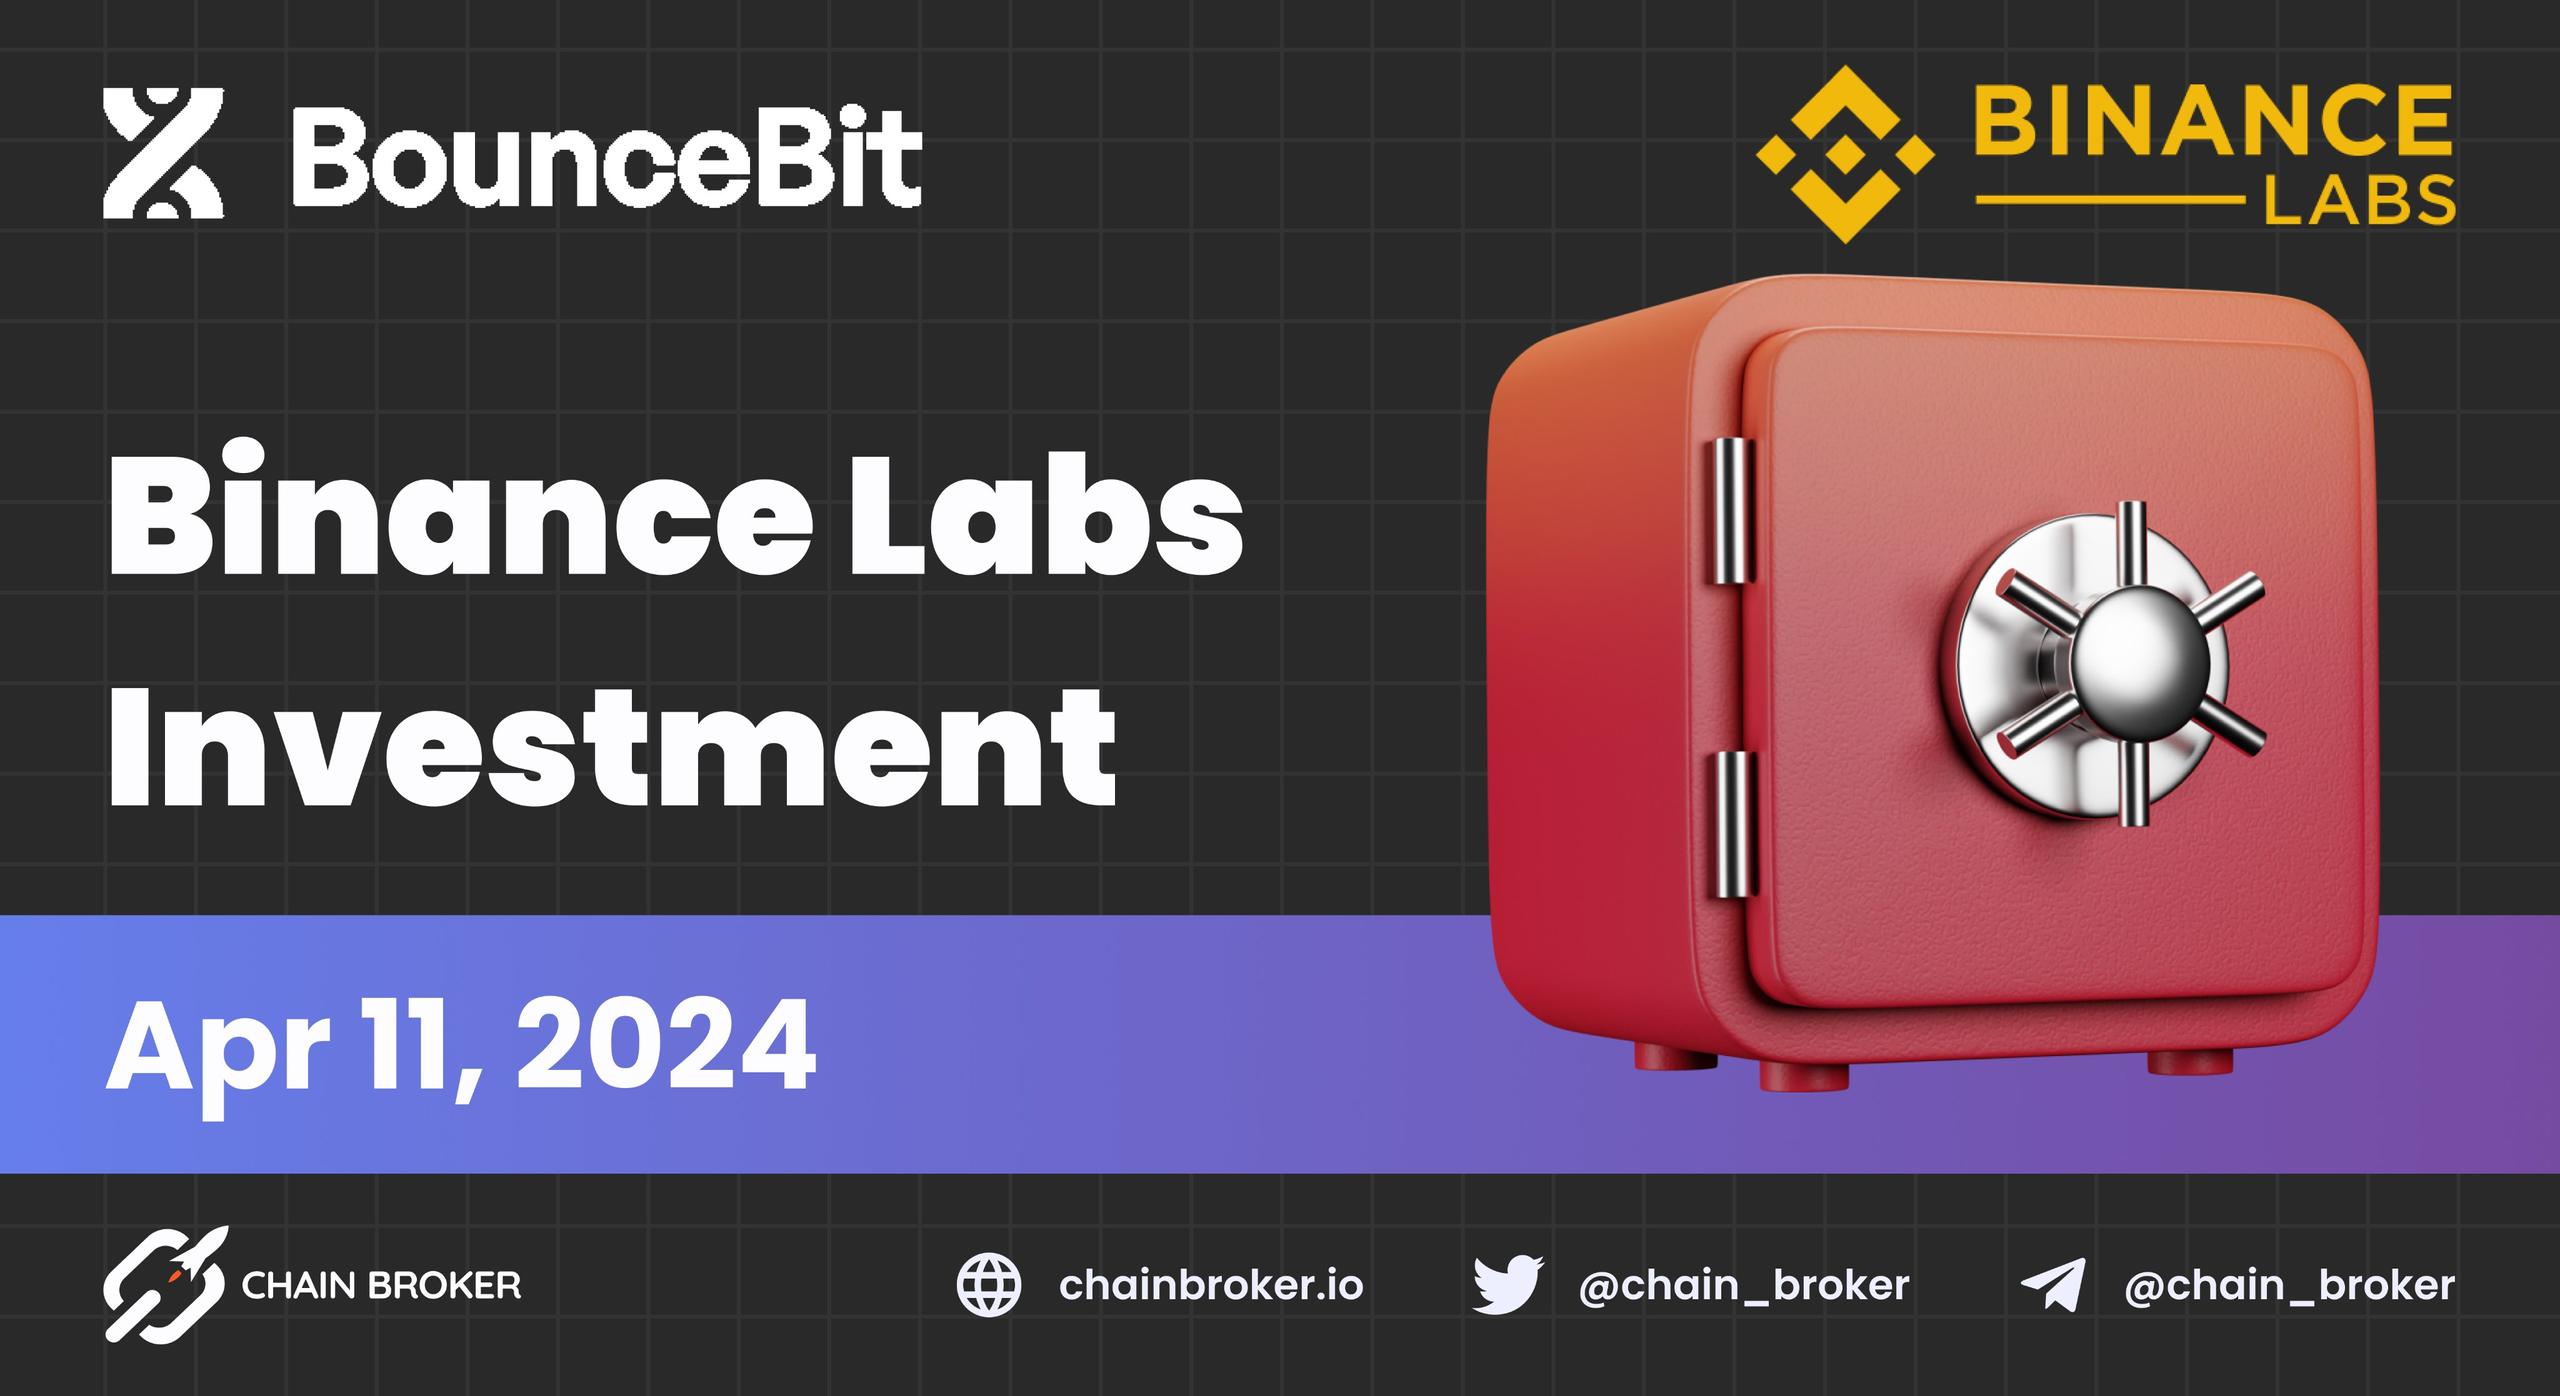 Binance Labs invests in BounceBit's restaking infrastructure